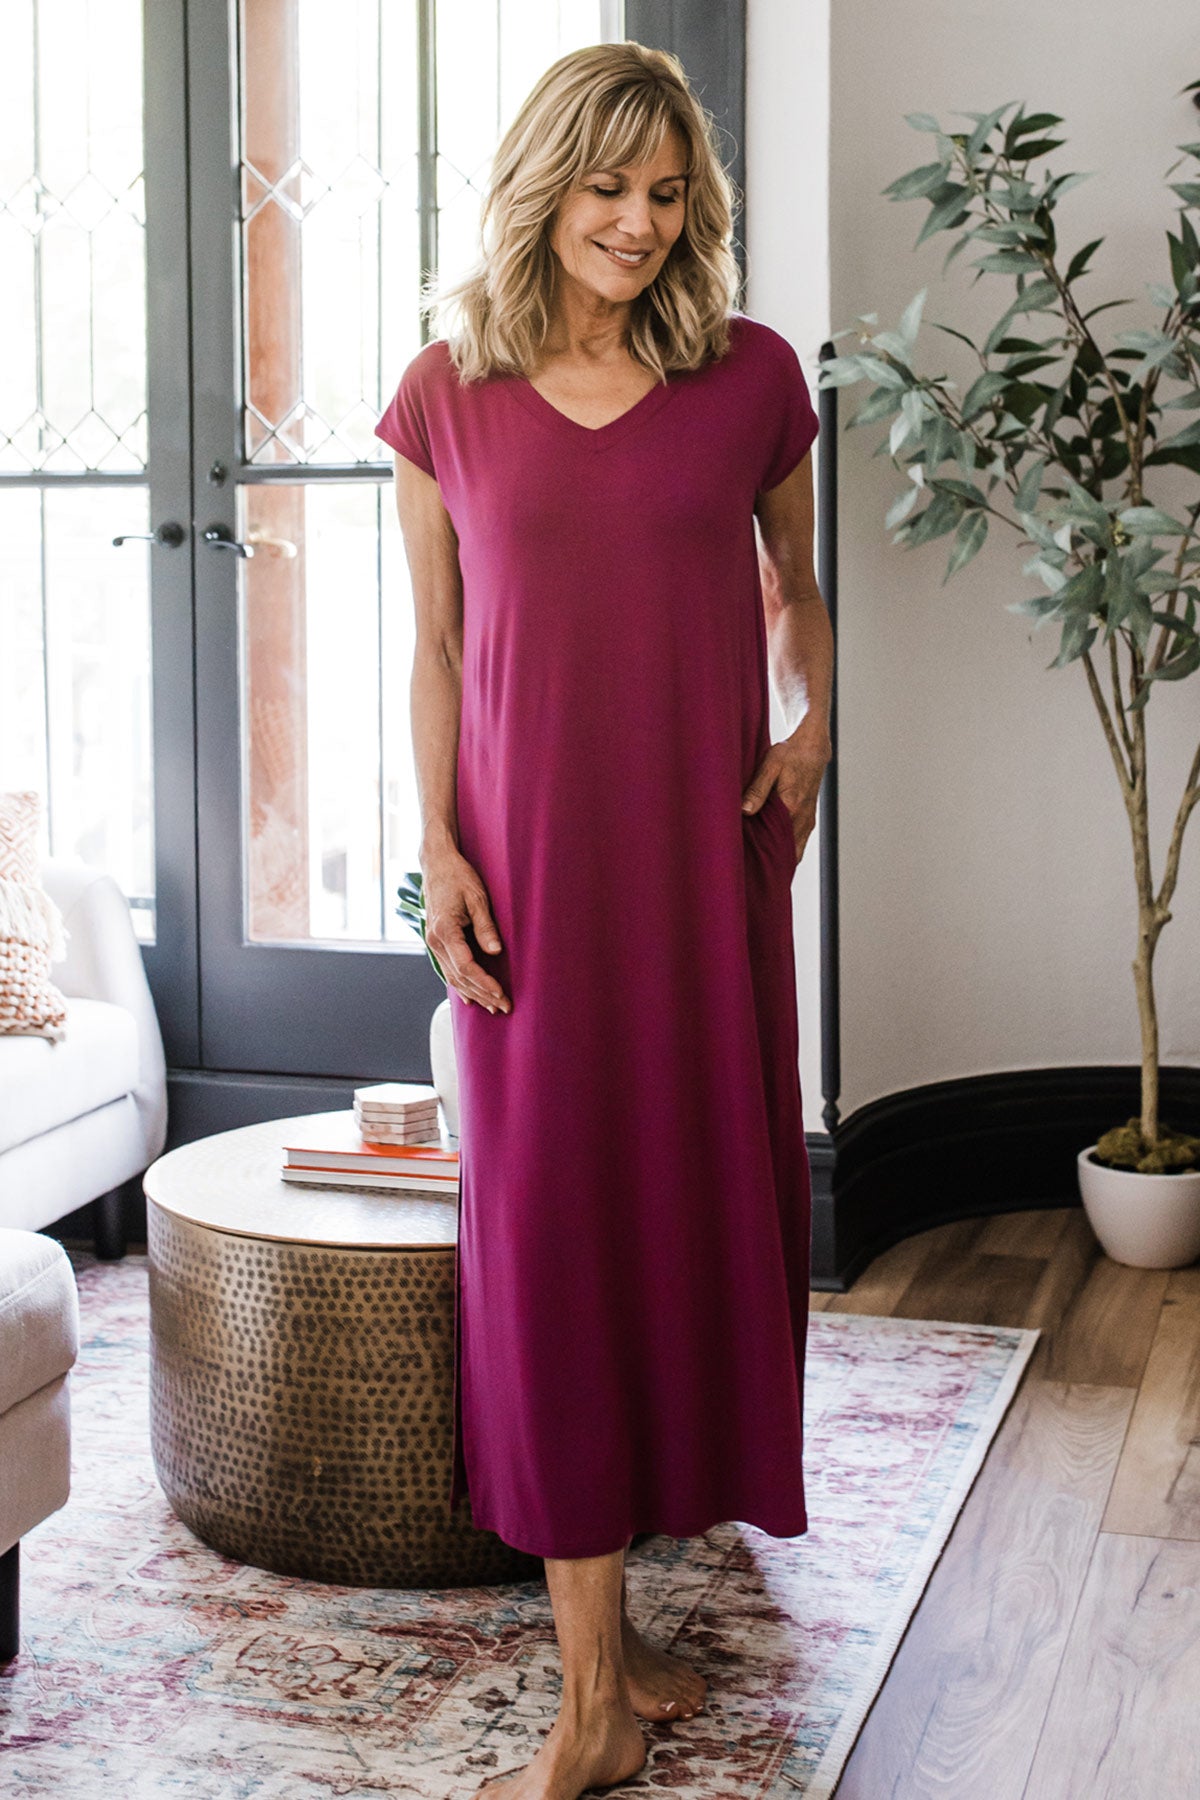 A woman standing and smiling with one hand in her pocket, wearing Yala Sloane V-Neck Cap Sleeve Bamboo Maxi Dress in Boysenberry